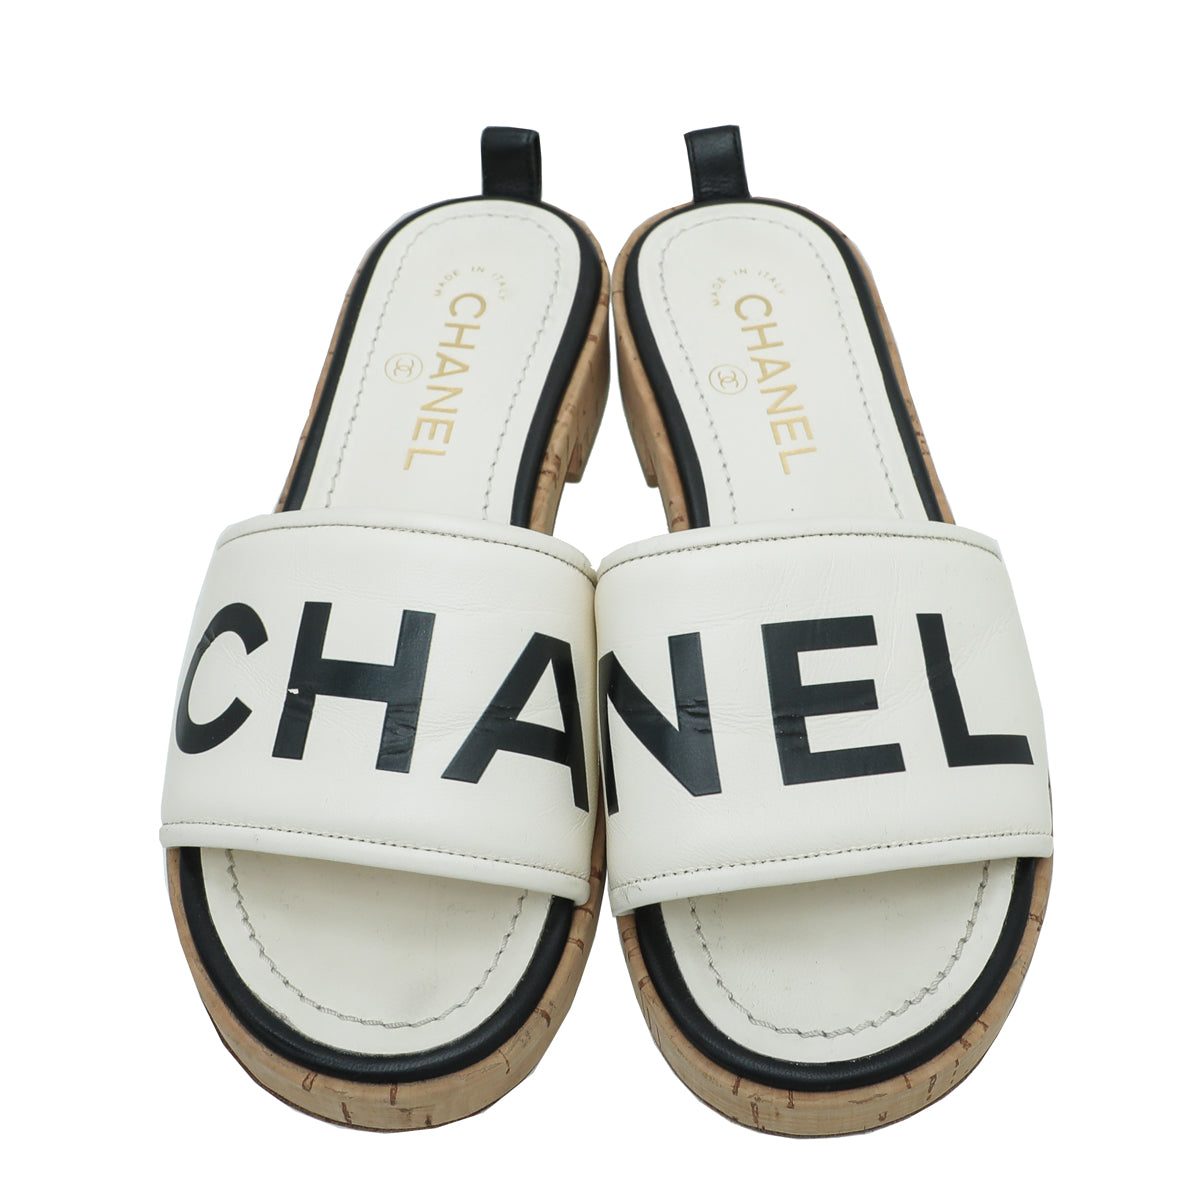 Chanel White Chanel Logo Mules Sandals 37